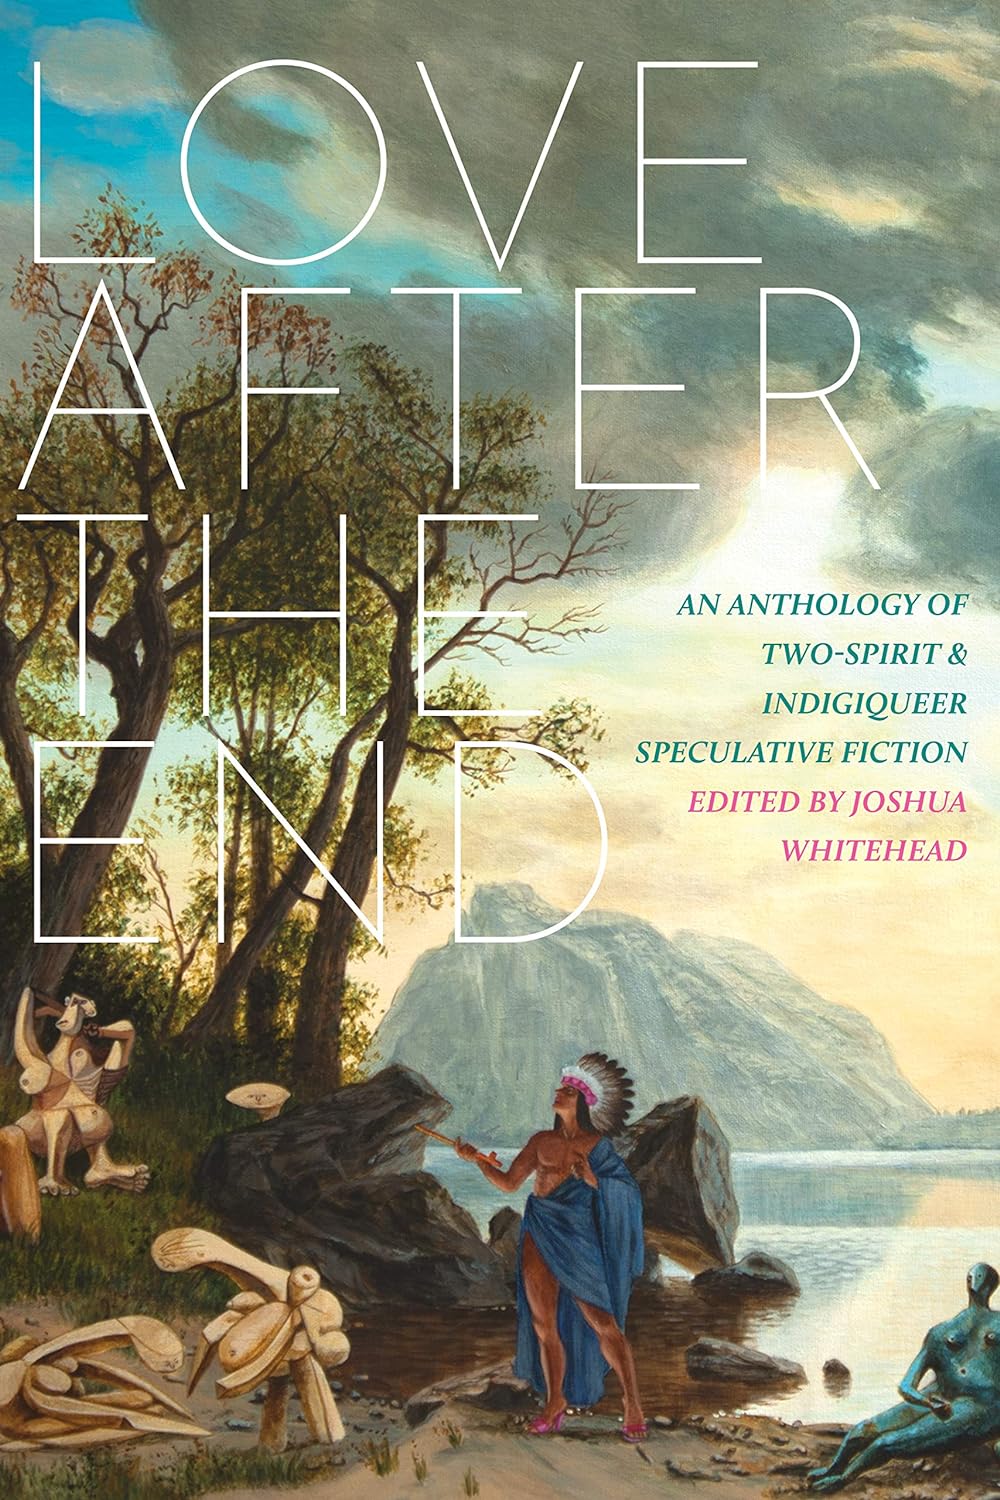 Book Cover of Love After the End, a take on colonial western art depicting an indigenous person